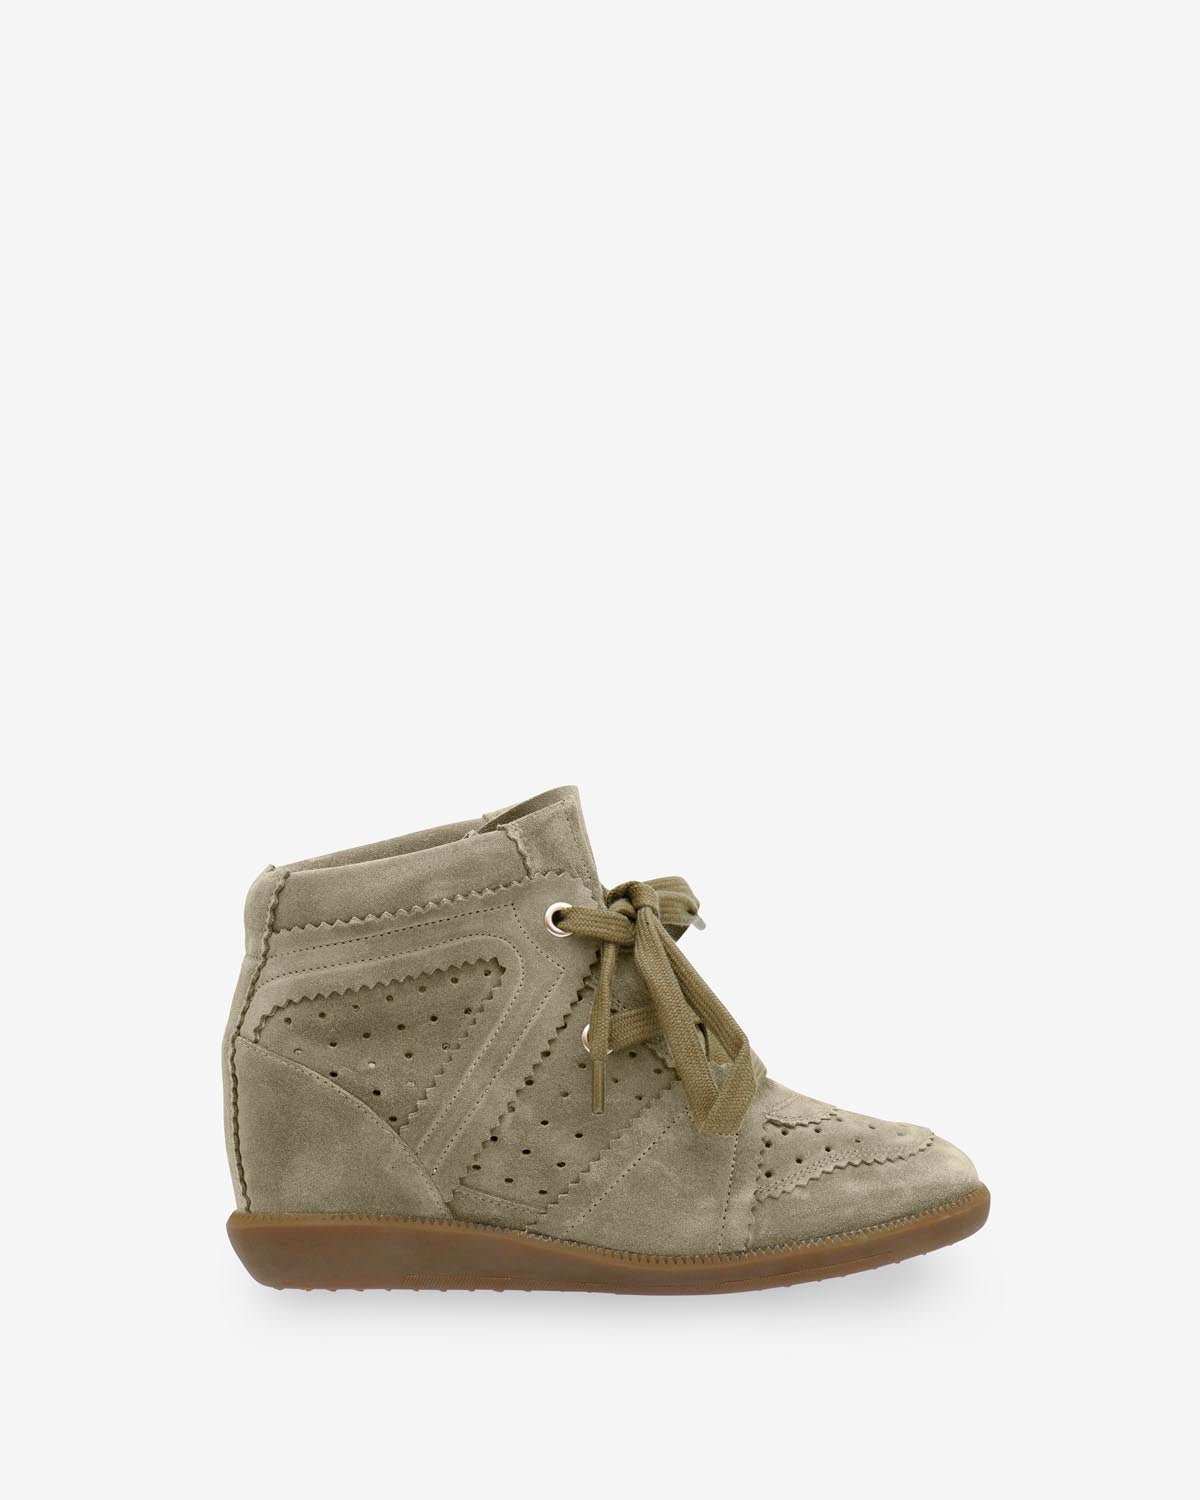 Sneakers bobby Woman Taupe 1